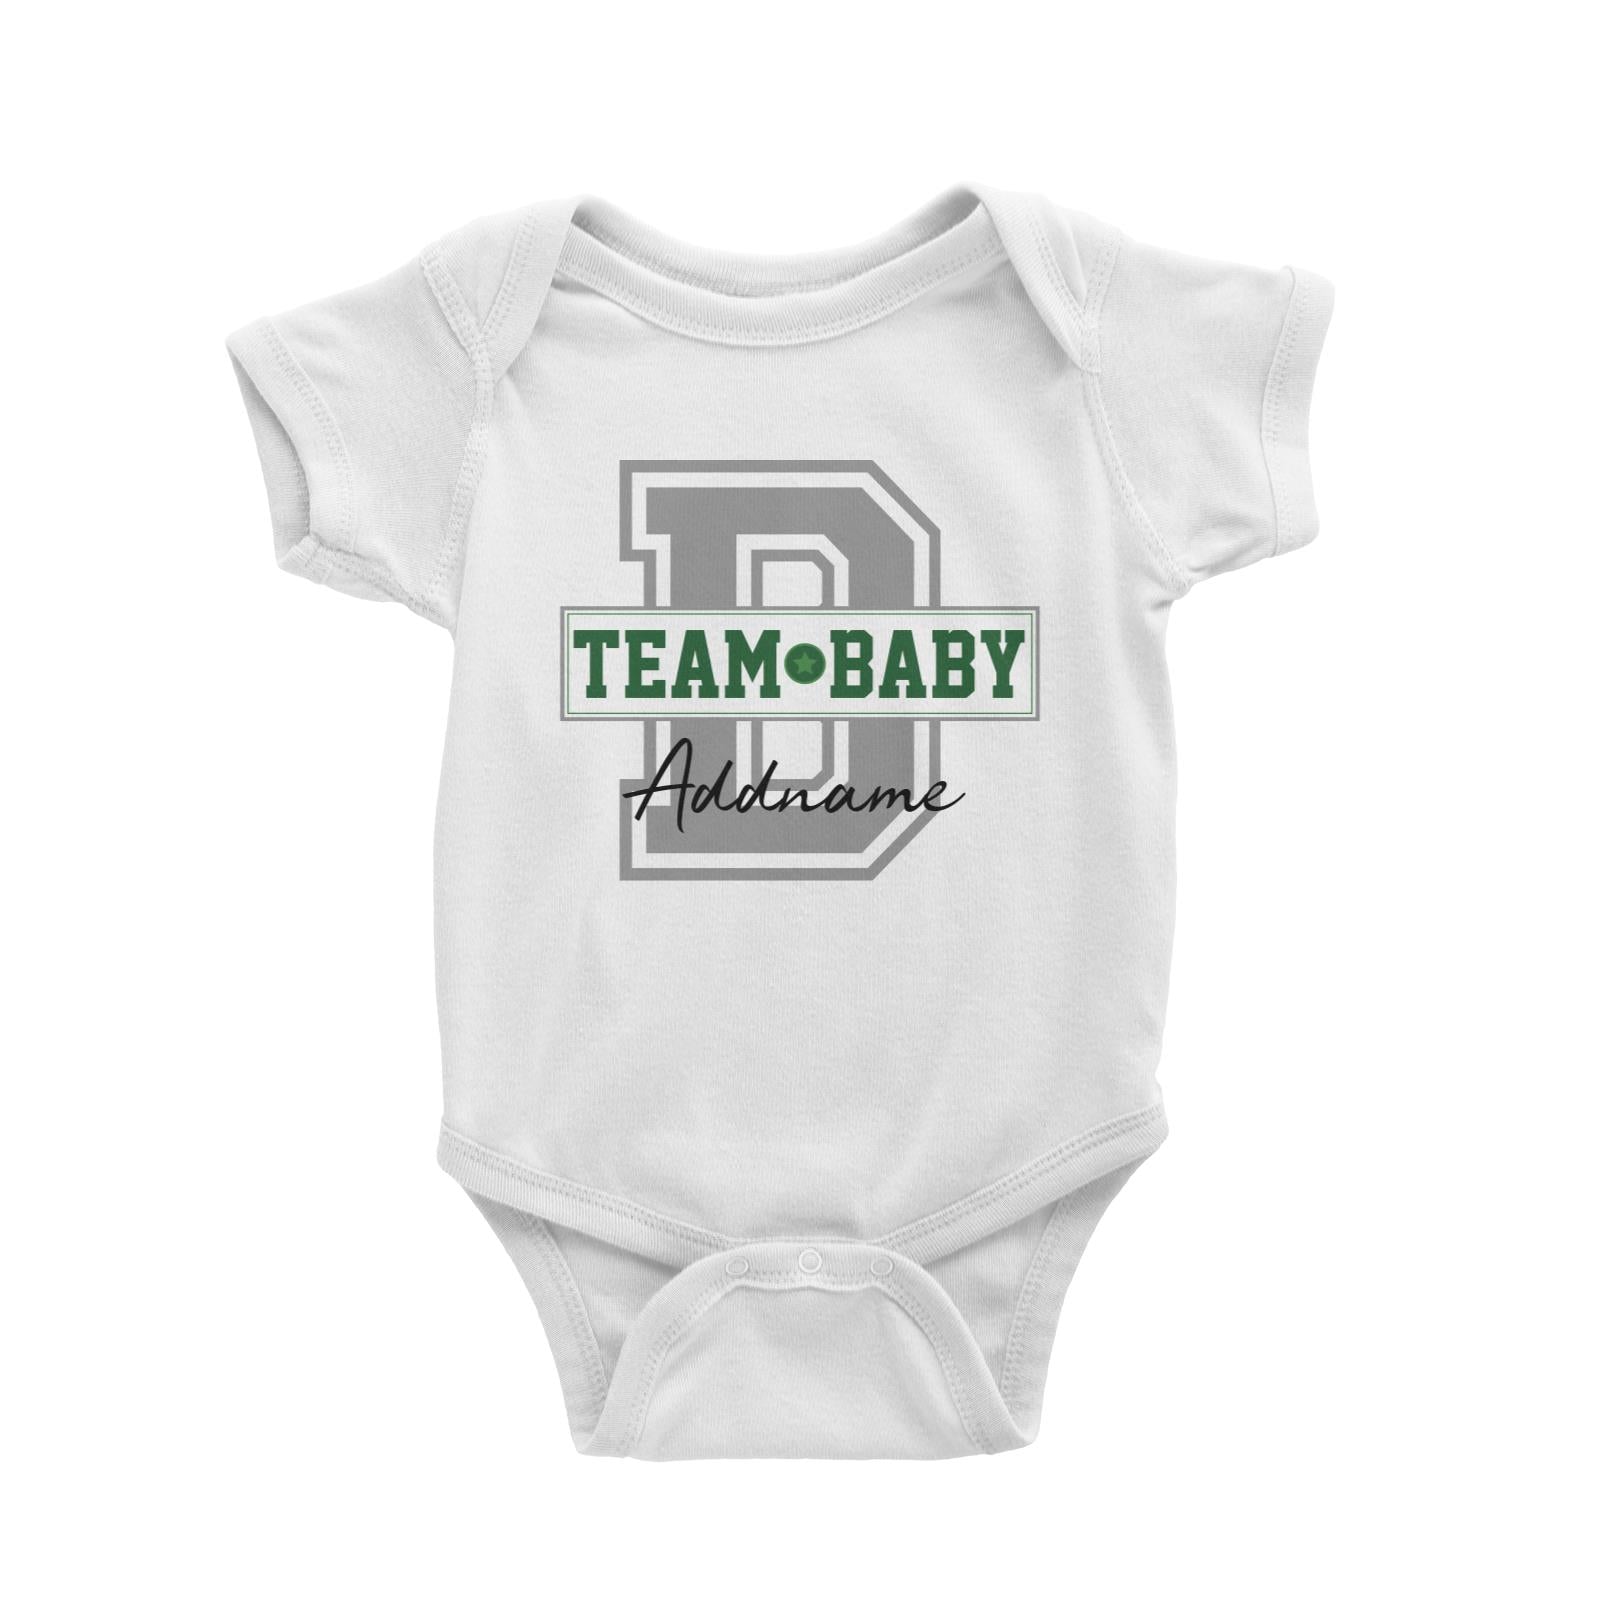 Team Baby Addname Baby Romper